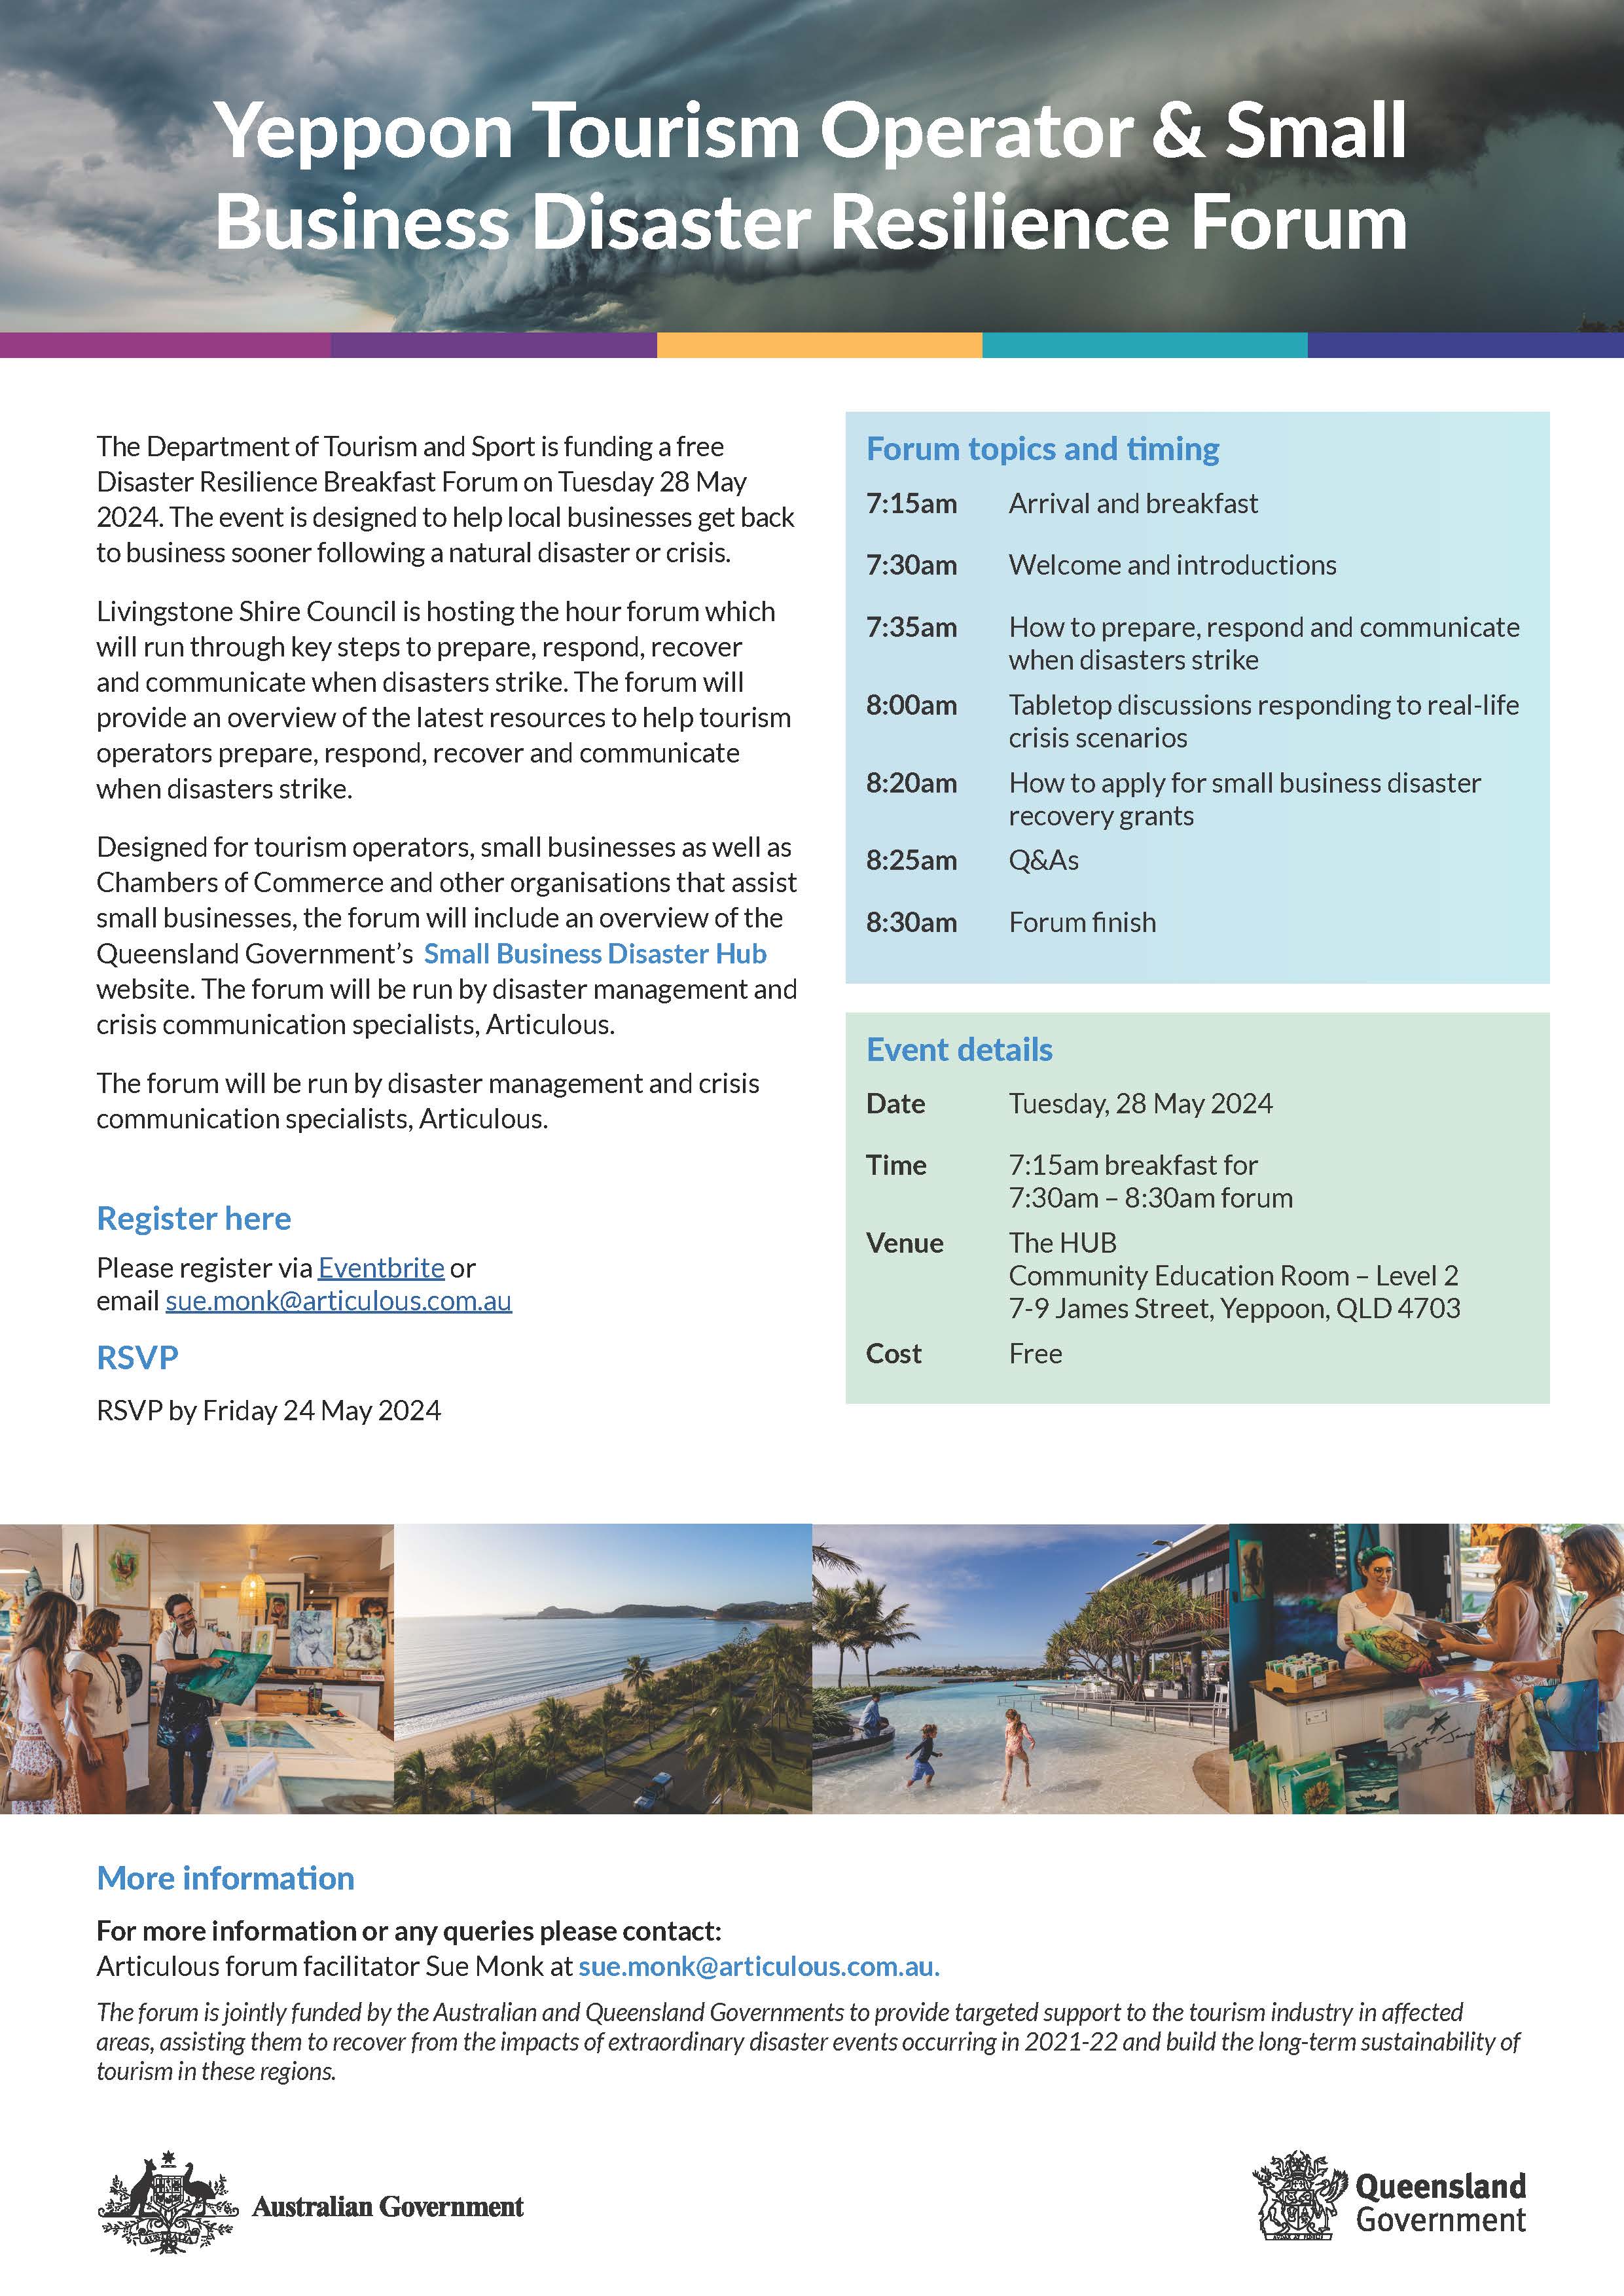 Yeppoon tourism and small business disaster resilience forum breakfast